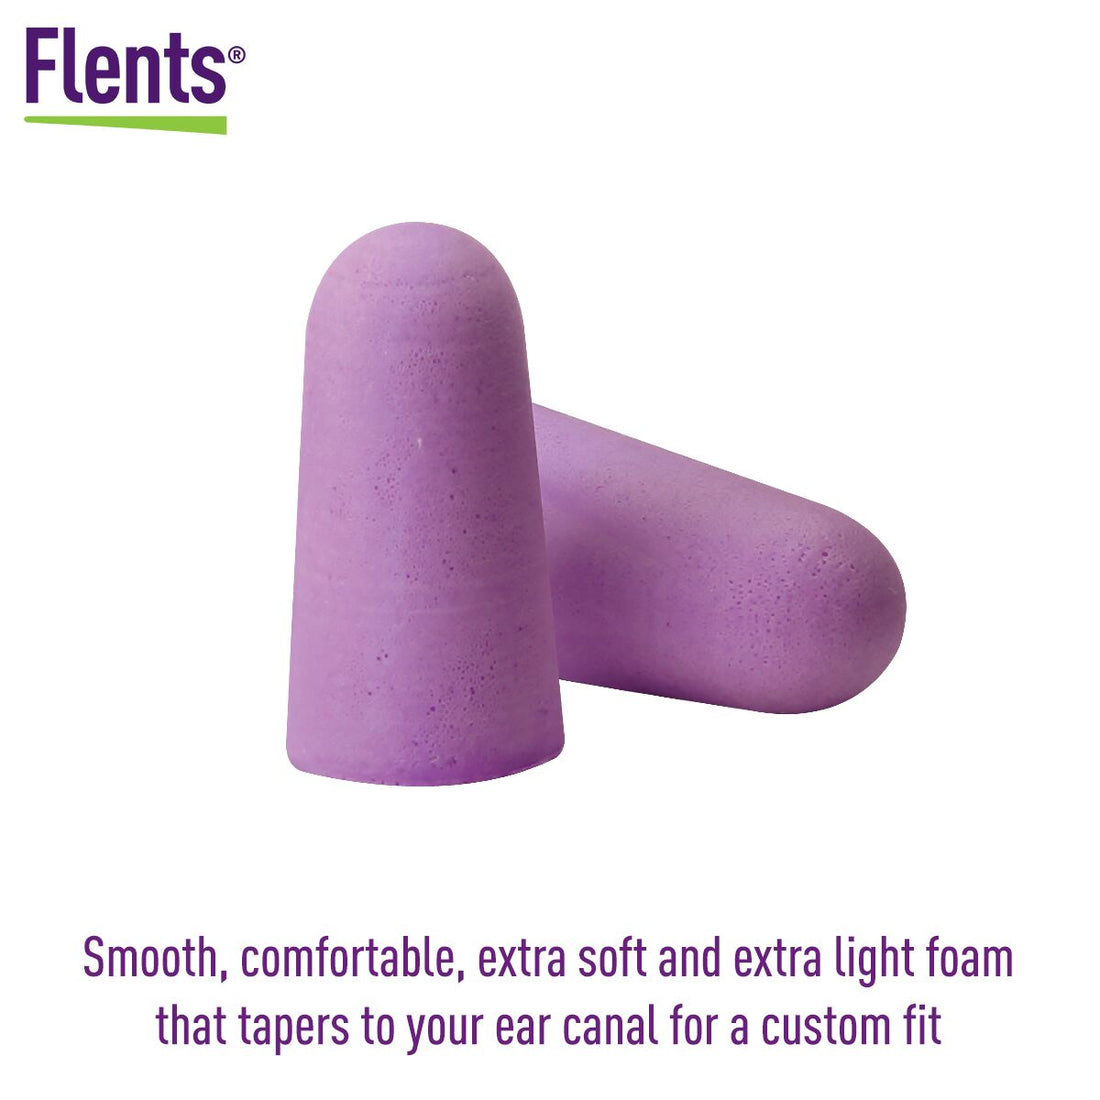 Quiet Time ear plugs are smooth, comfortable, extra soft and extra light foam that tapers to your ear